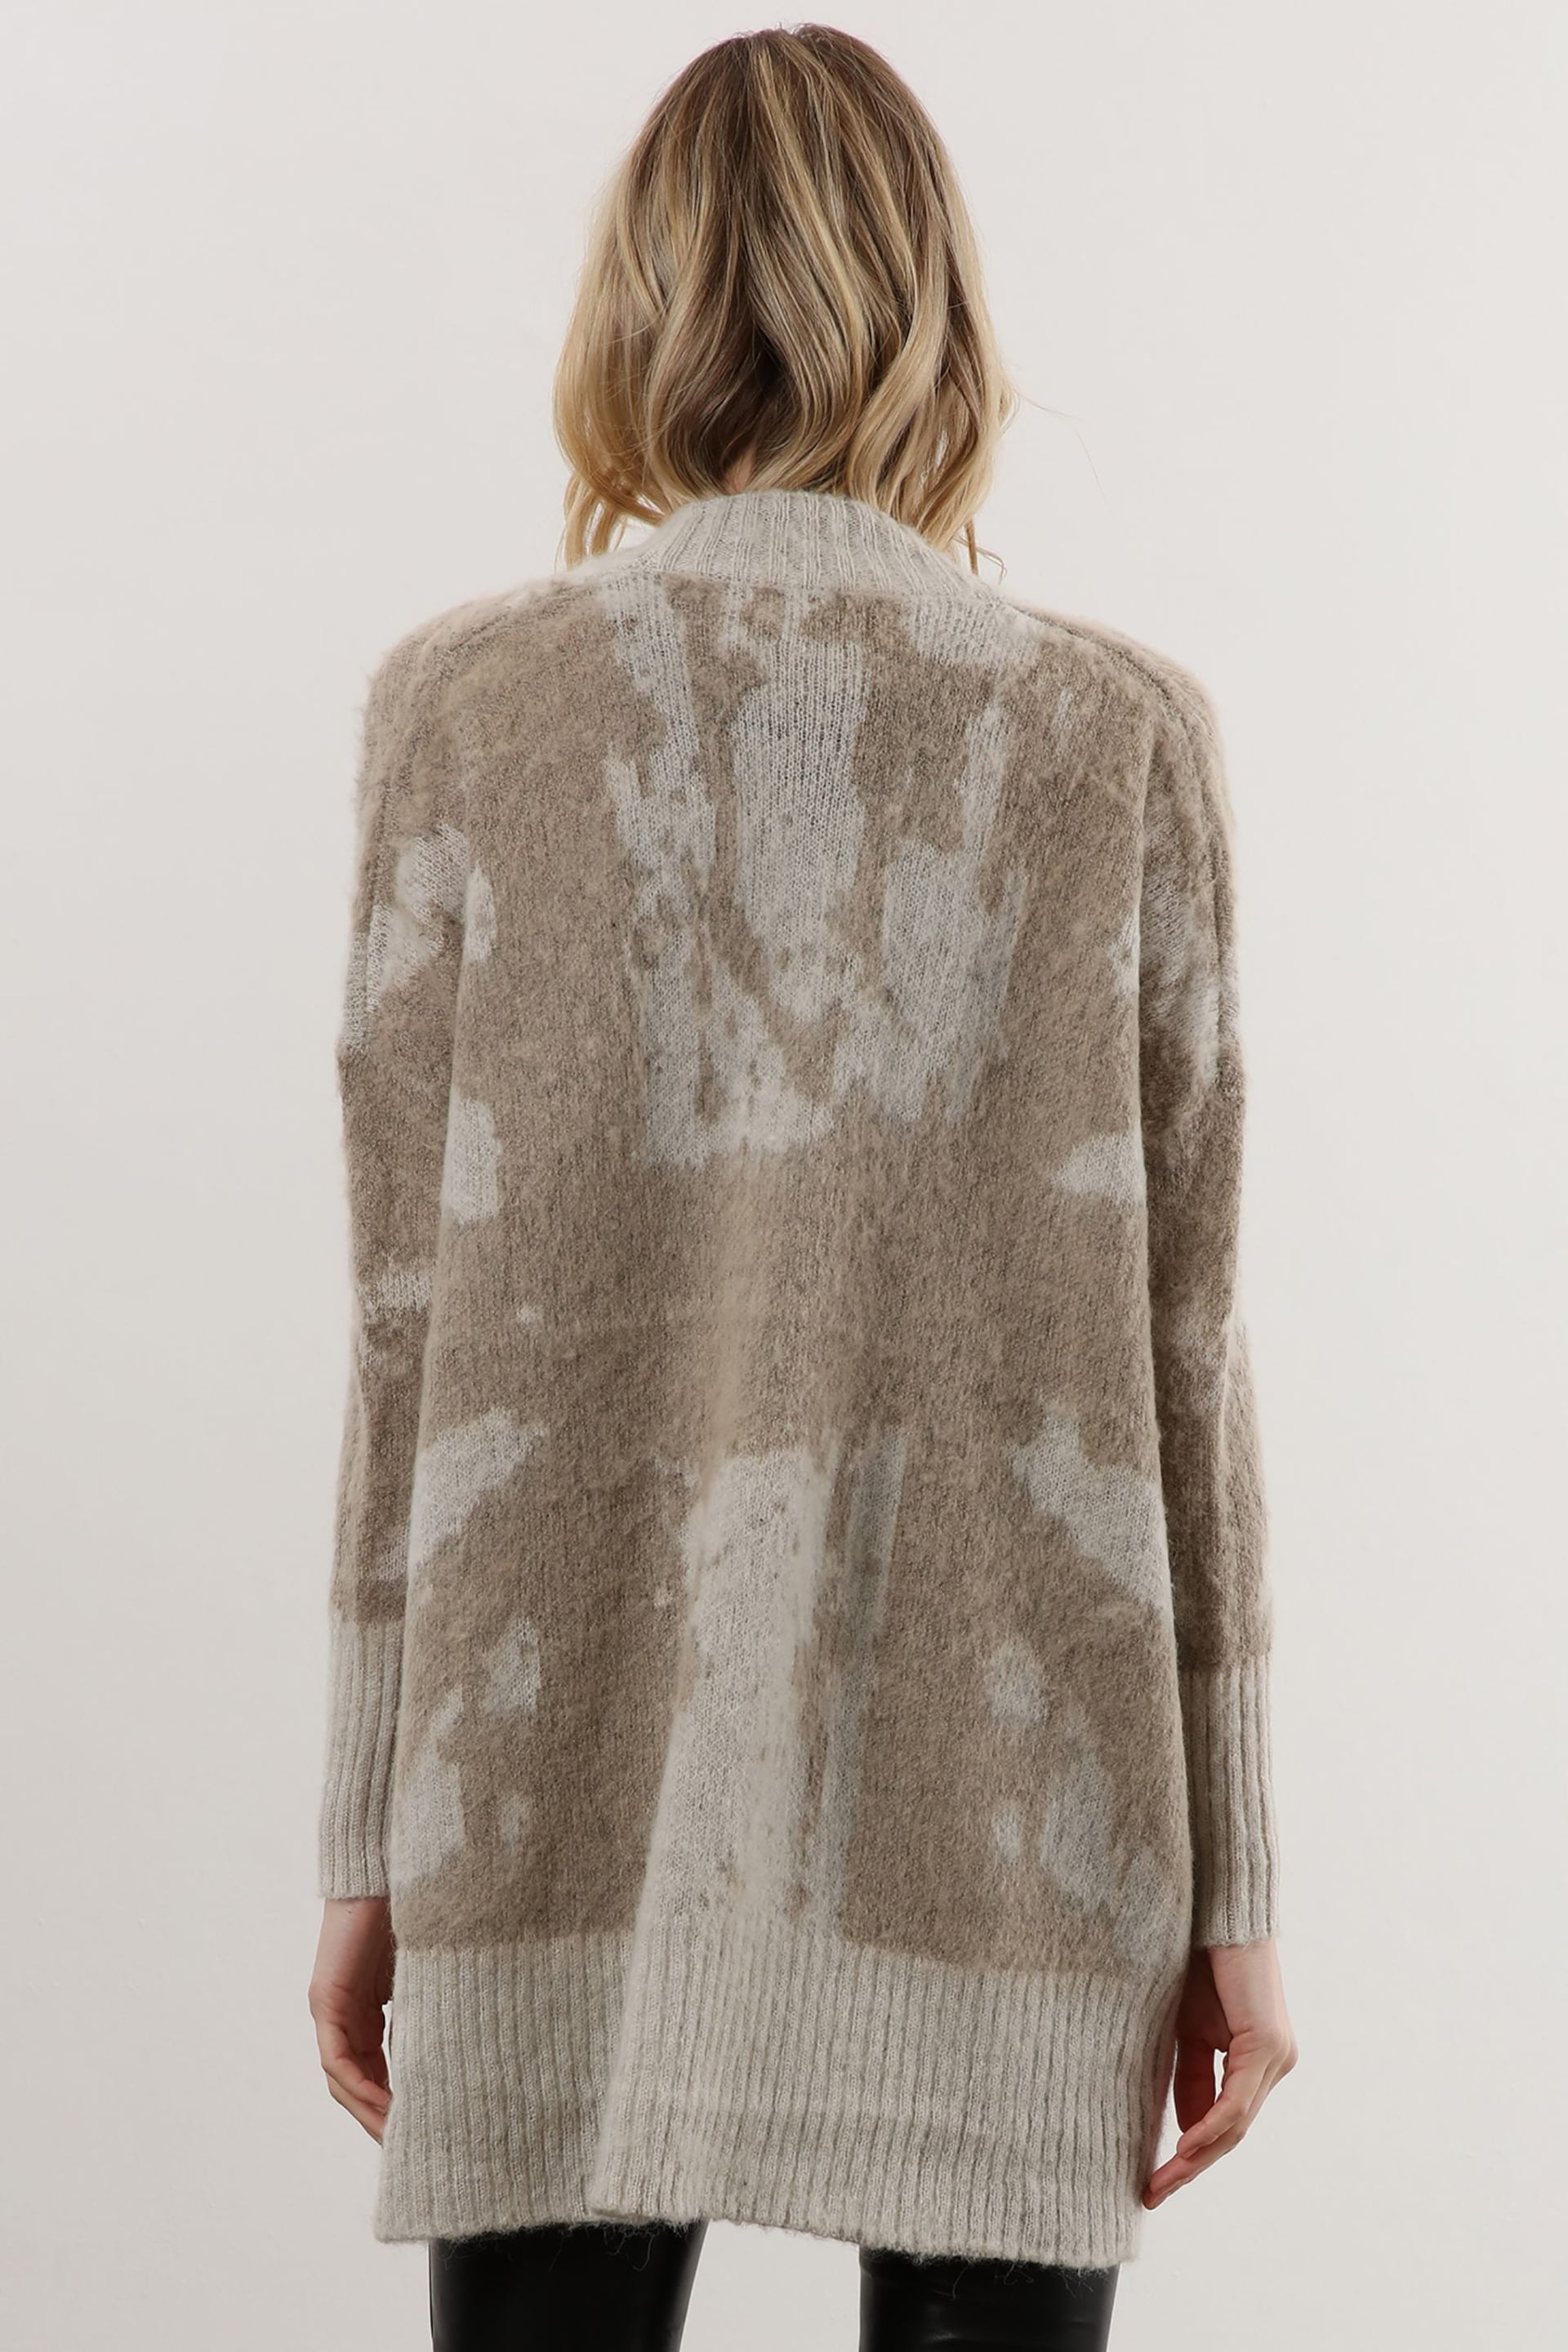 Religion Natural Light Weight Textured Shawl Cardigan In Neutrals - Image 2 of 6